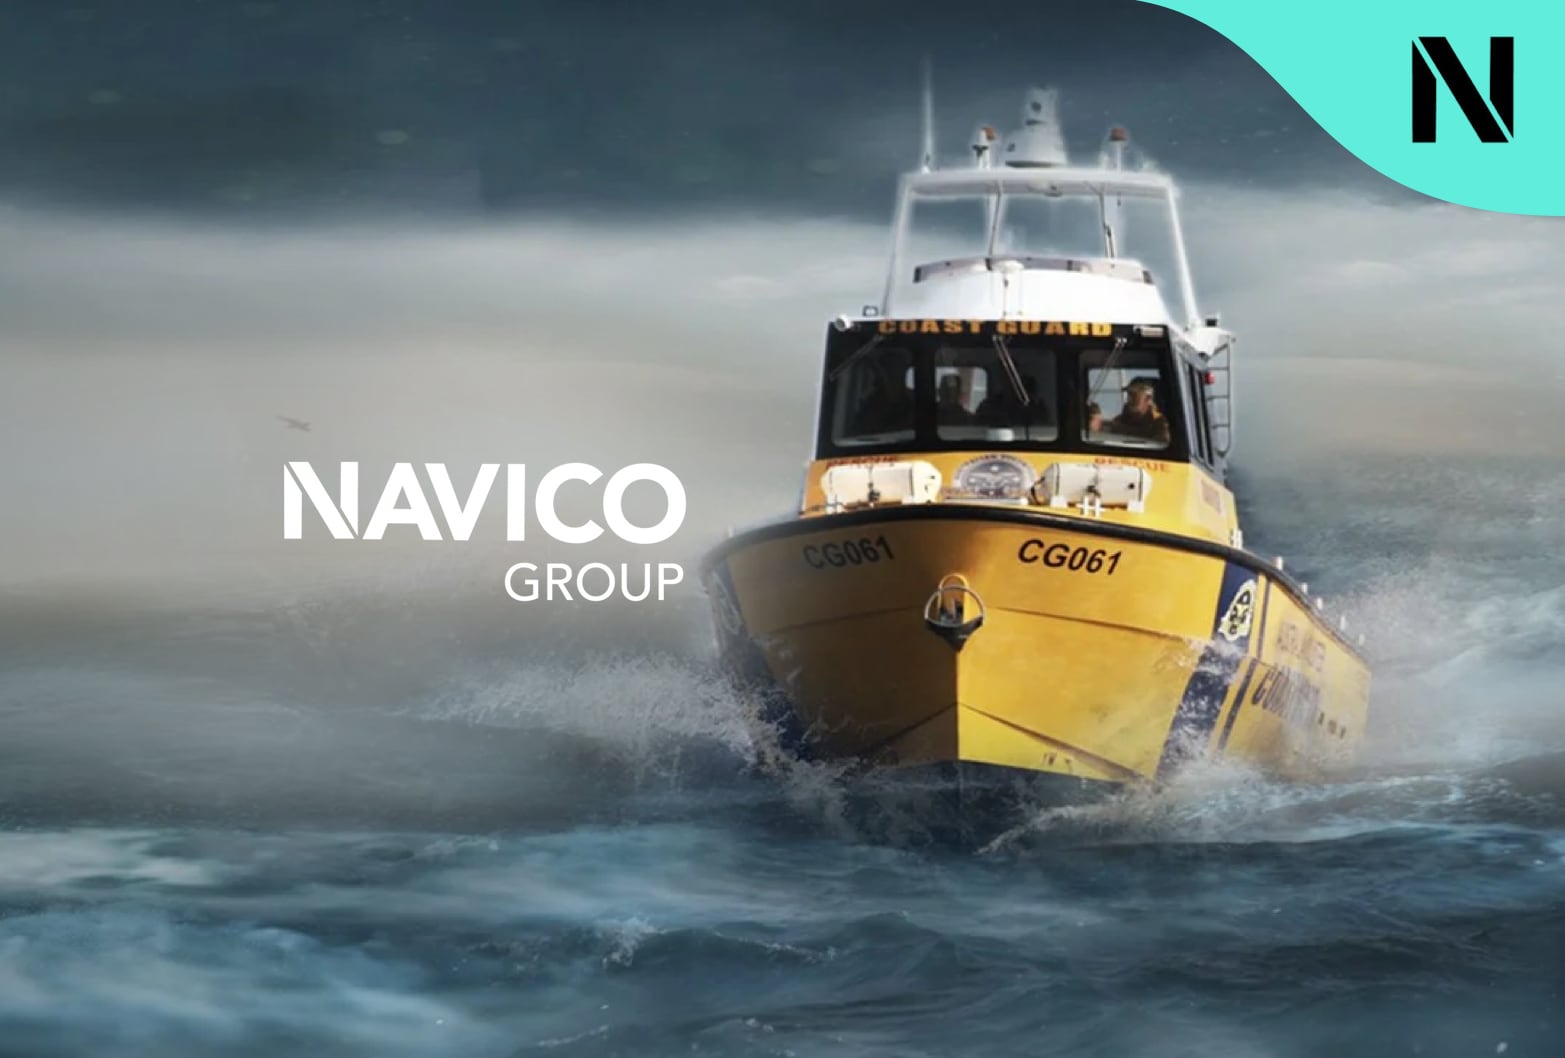 Navico Group header graphic showing a coast guard boat in the ocean